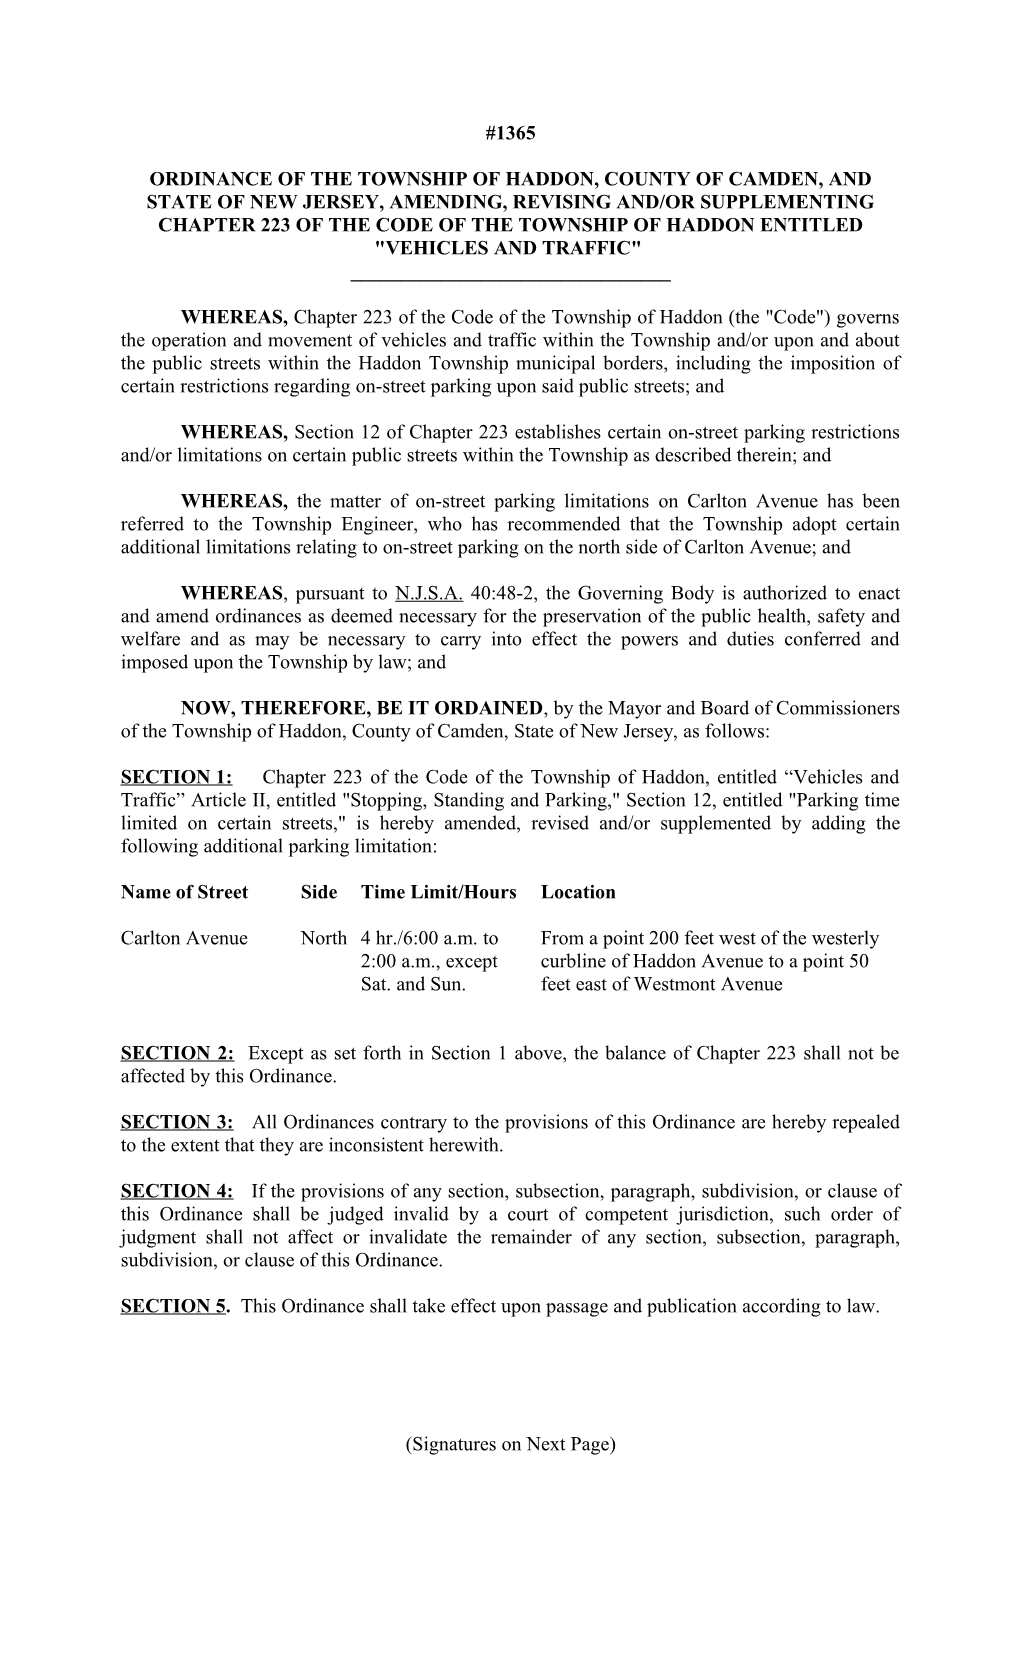 Ordinance of the Township of Haddon, County of Camden,And State of New Jersey, Amending